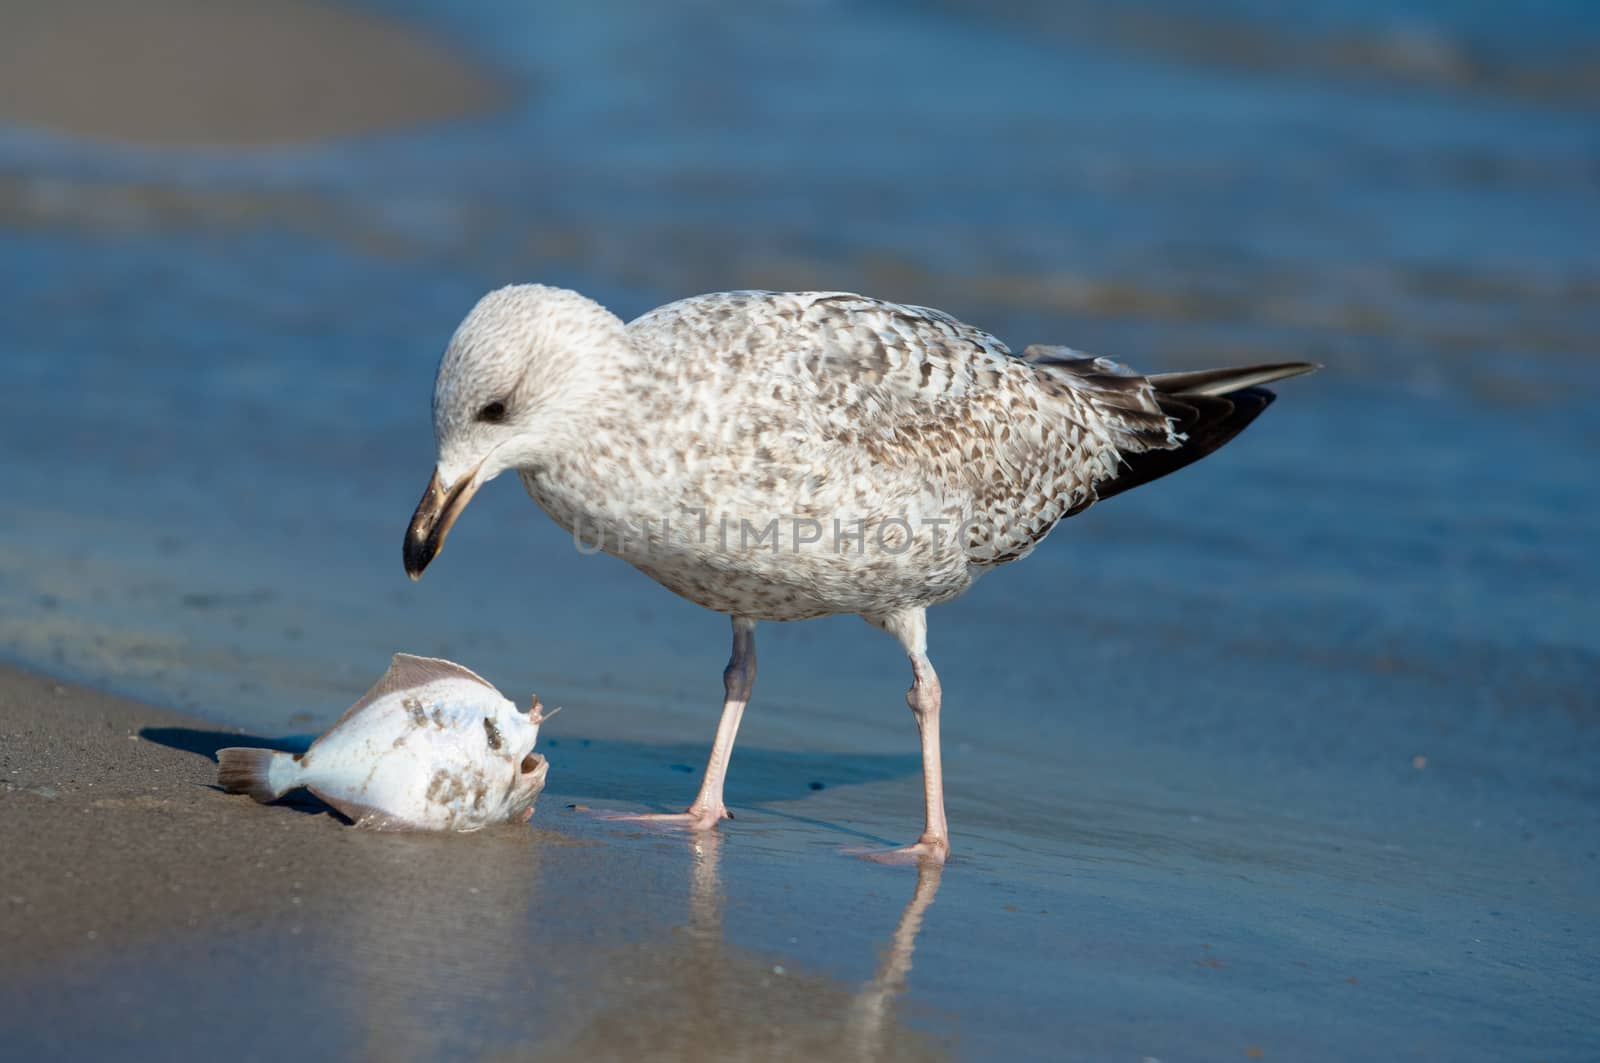 Seagull caught a fish on a sandy beach and eats it